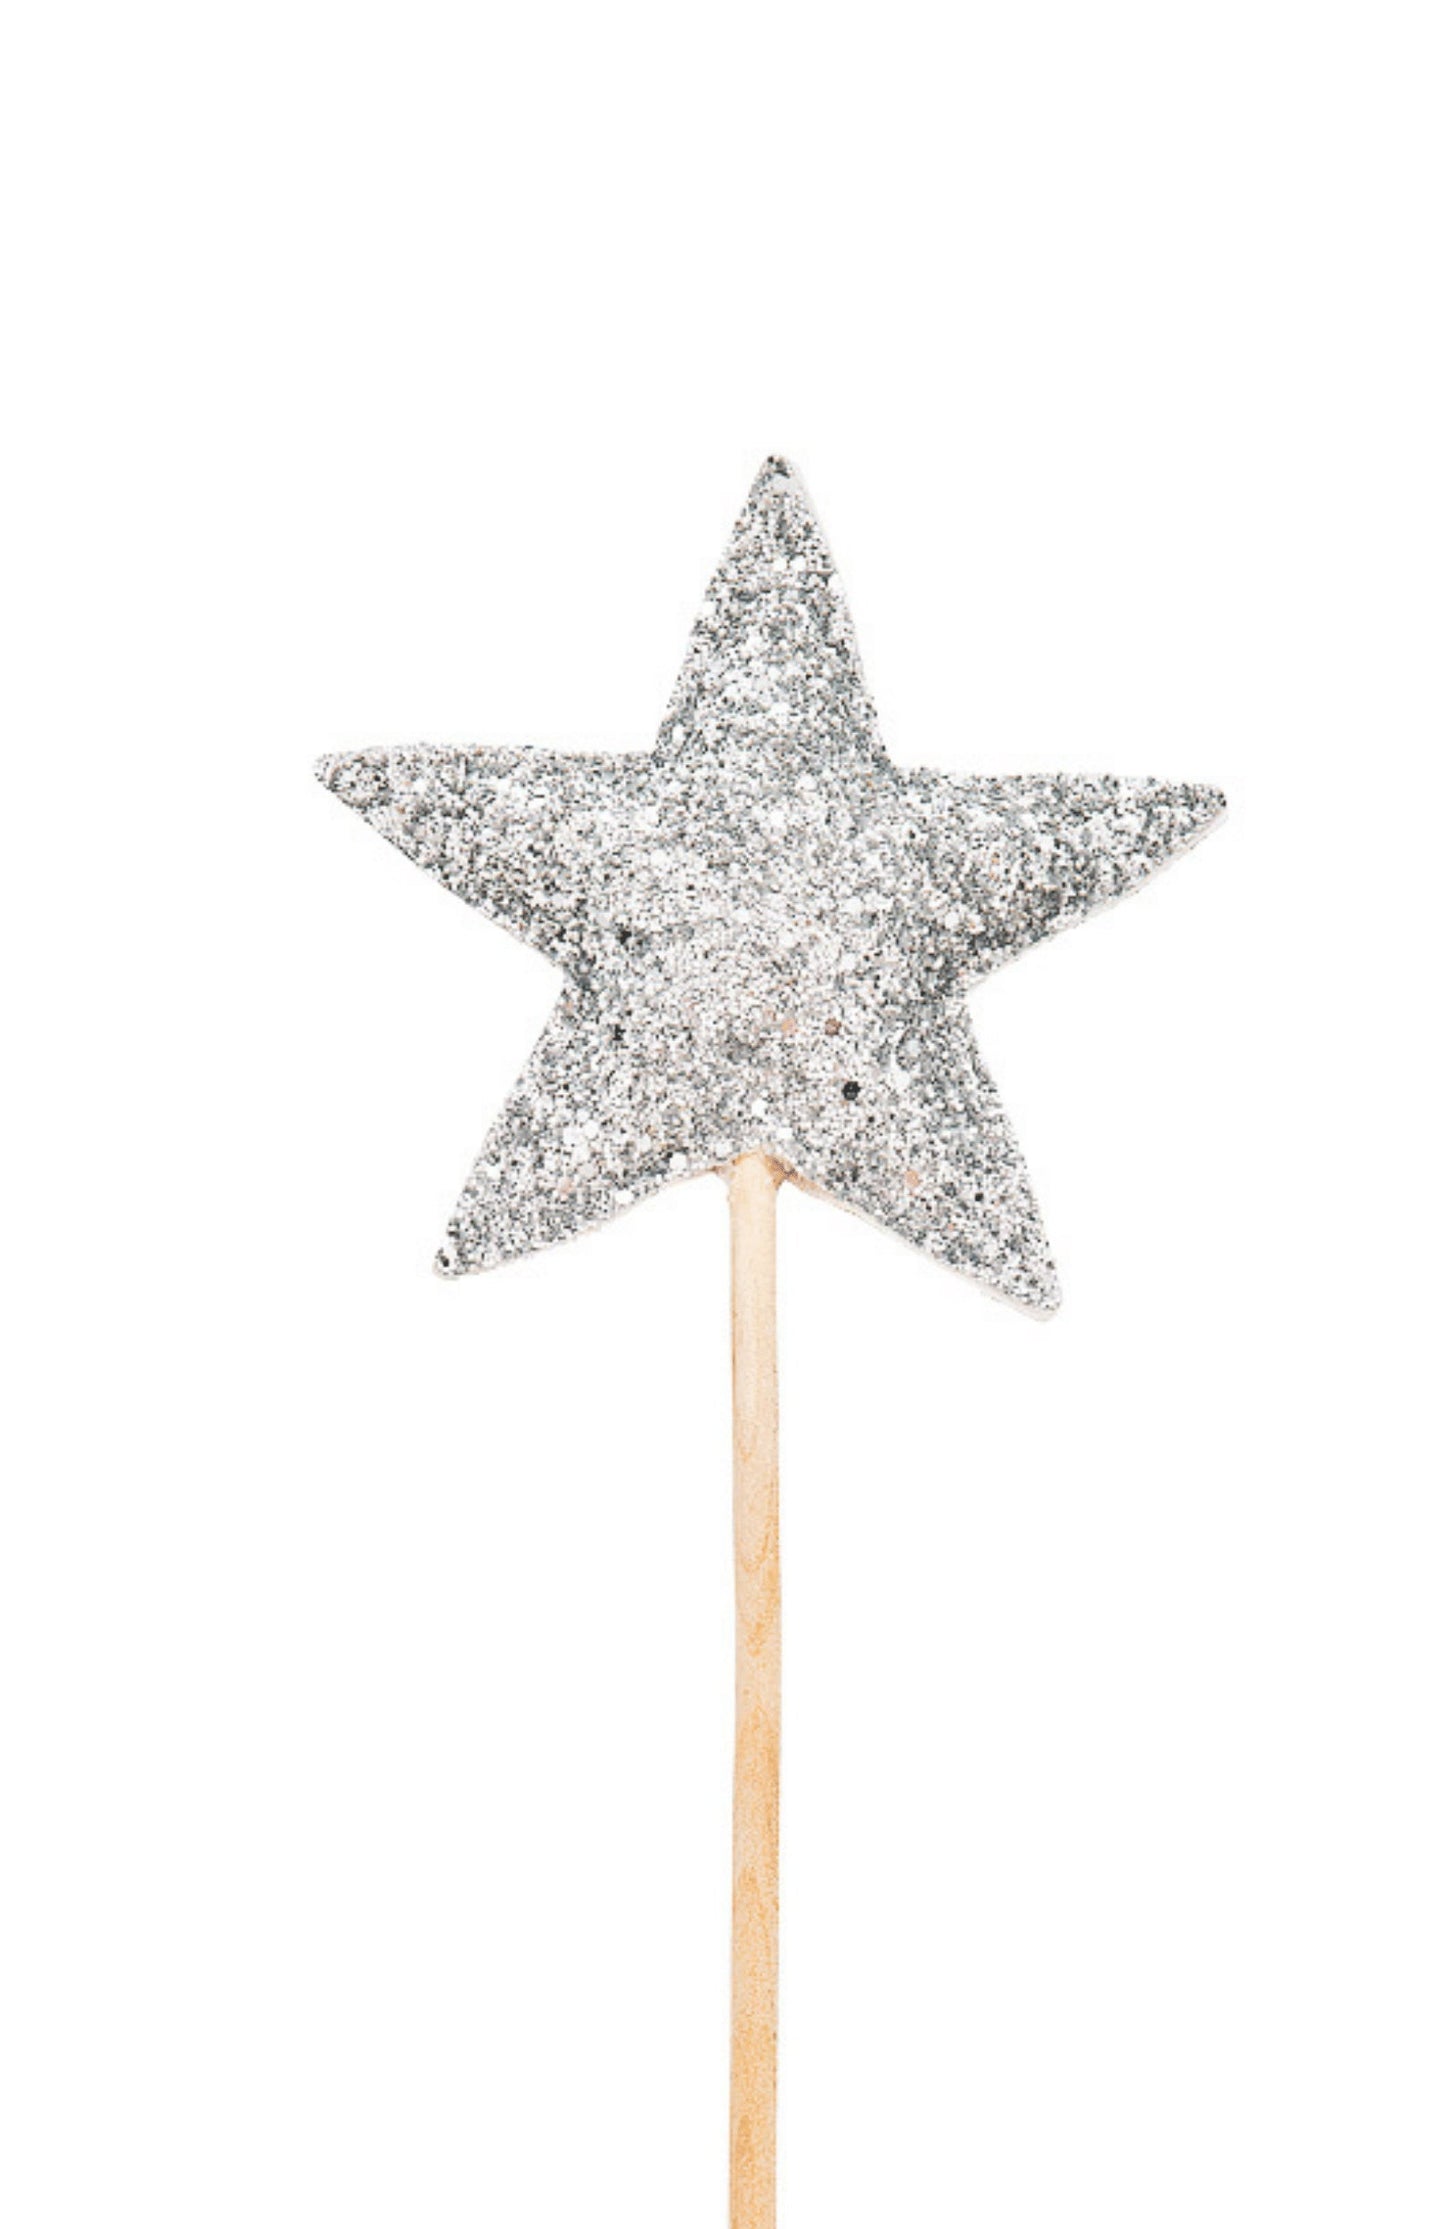 Wands - Large Star Wand In Gold Or Silver